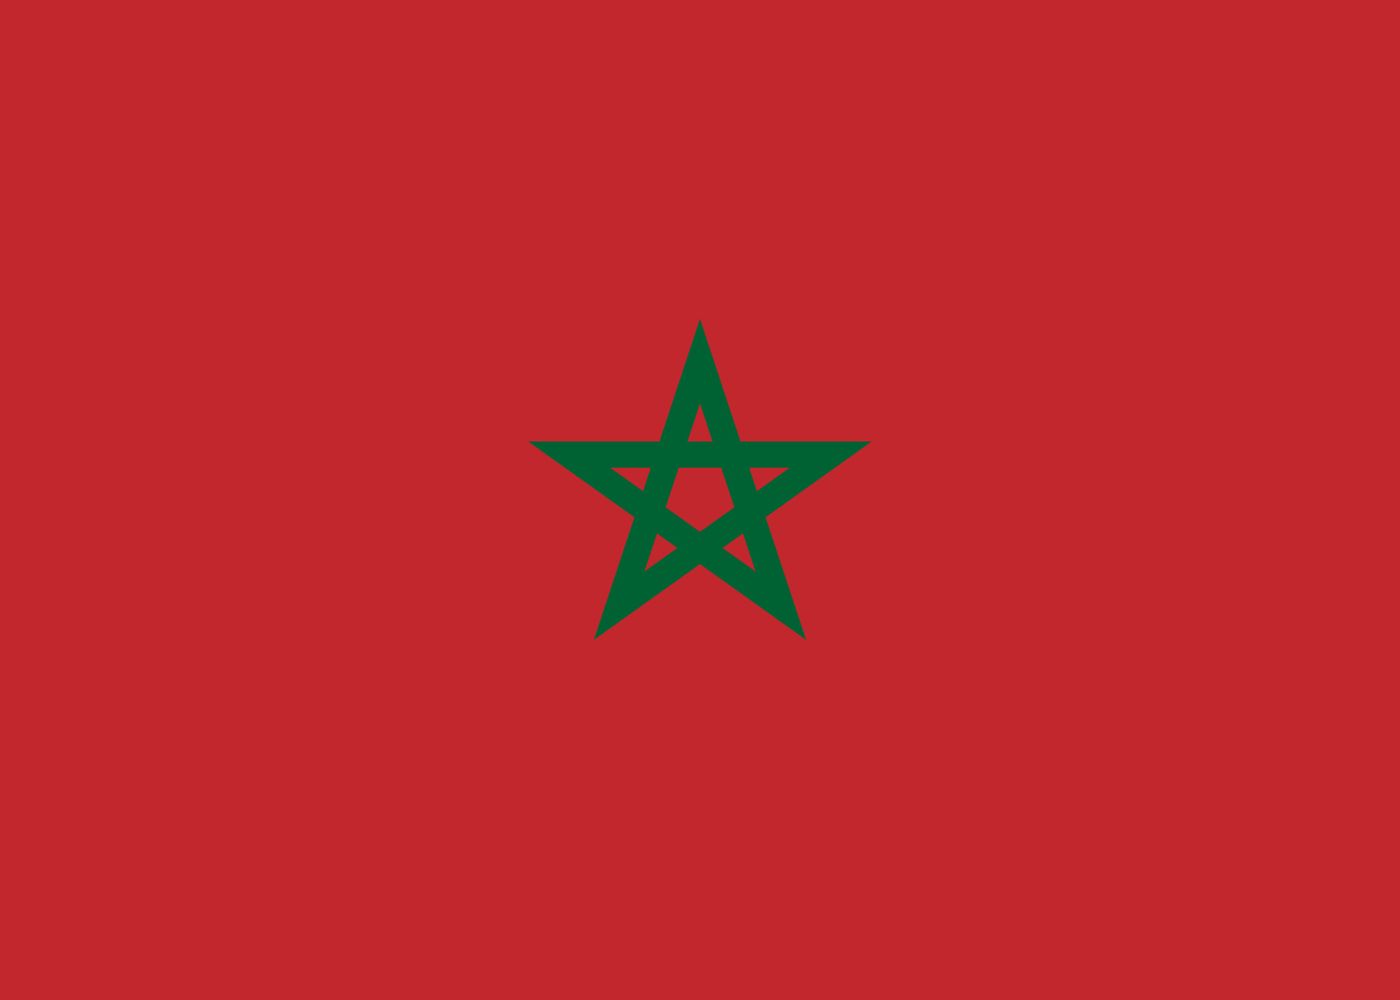 Moroccan flag picture